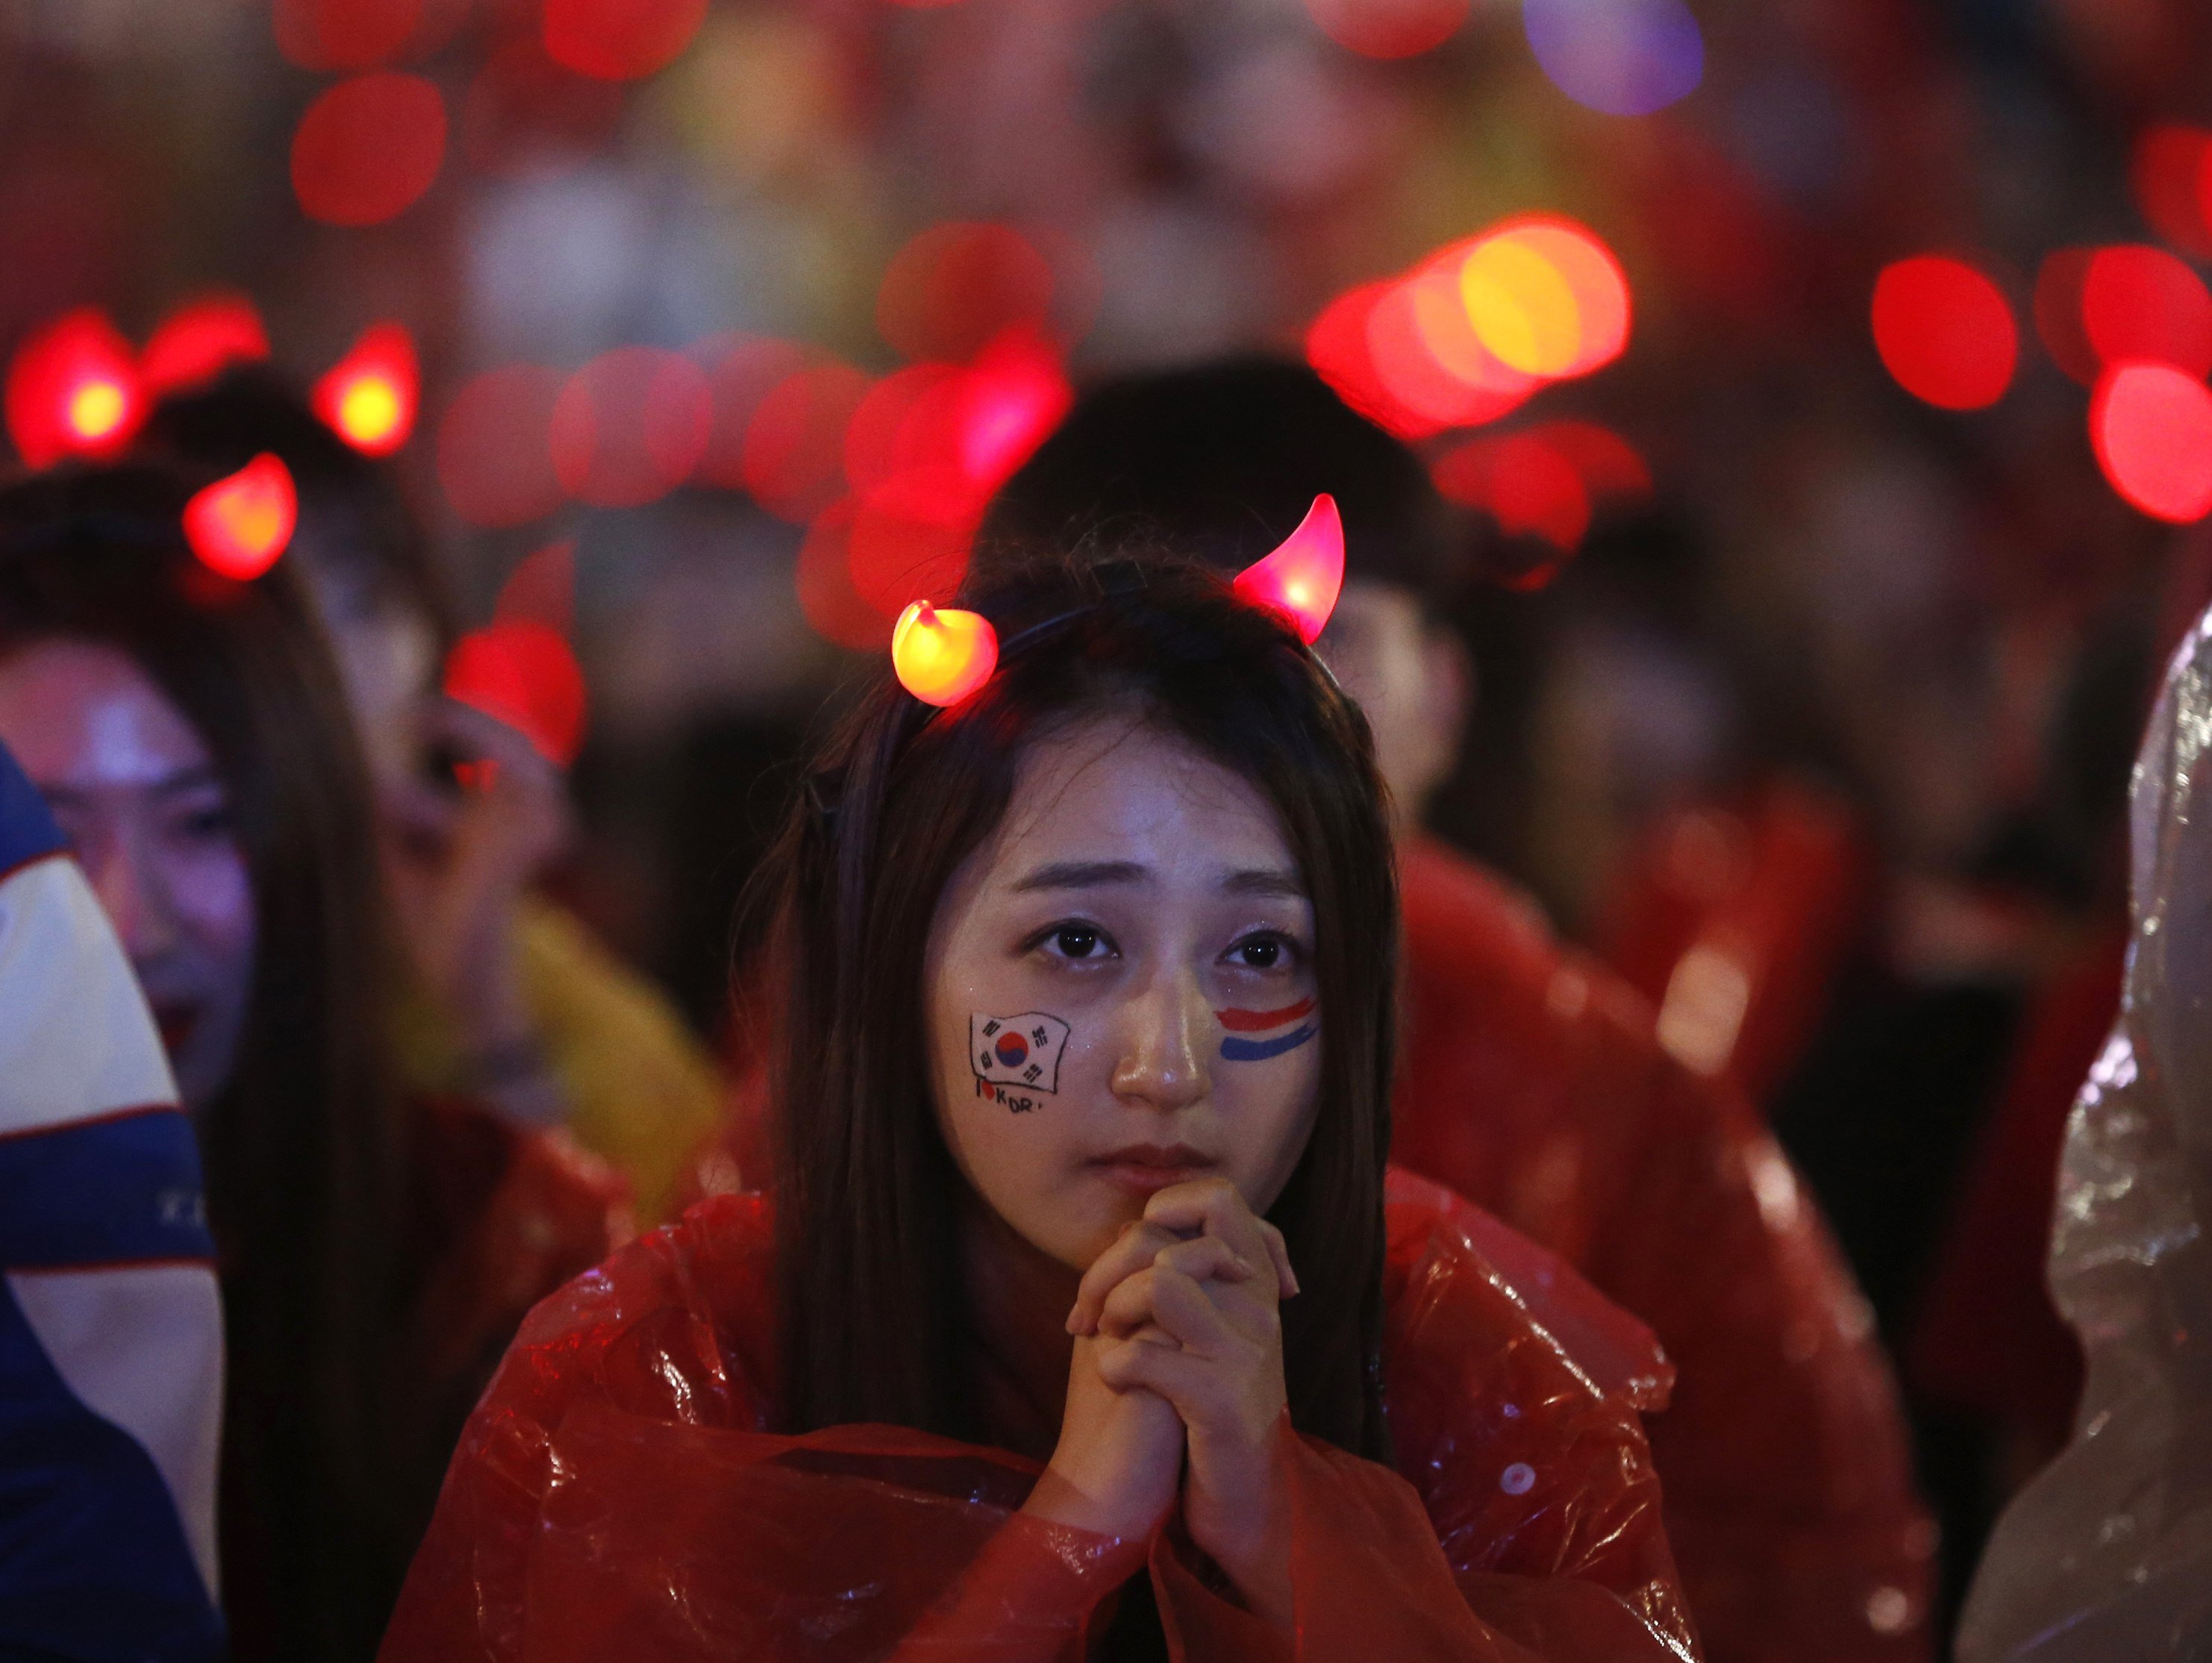 A South Korean fan watches a live TV broadcast of her team's 2014 World Cup Group H match against Algeria, in Seoul on June 23, 2014.